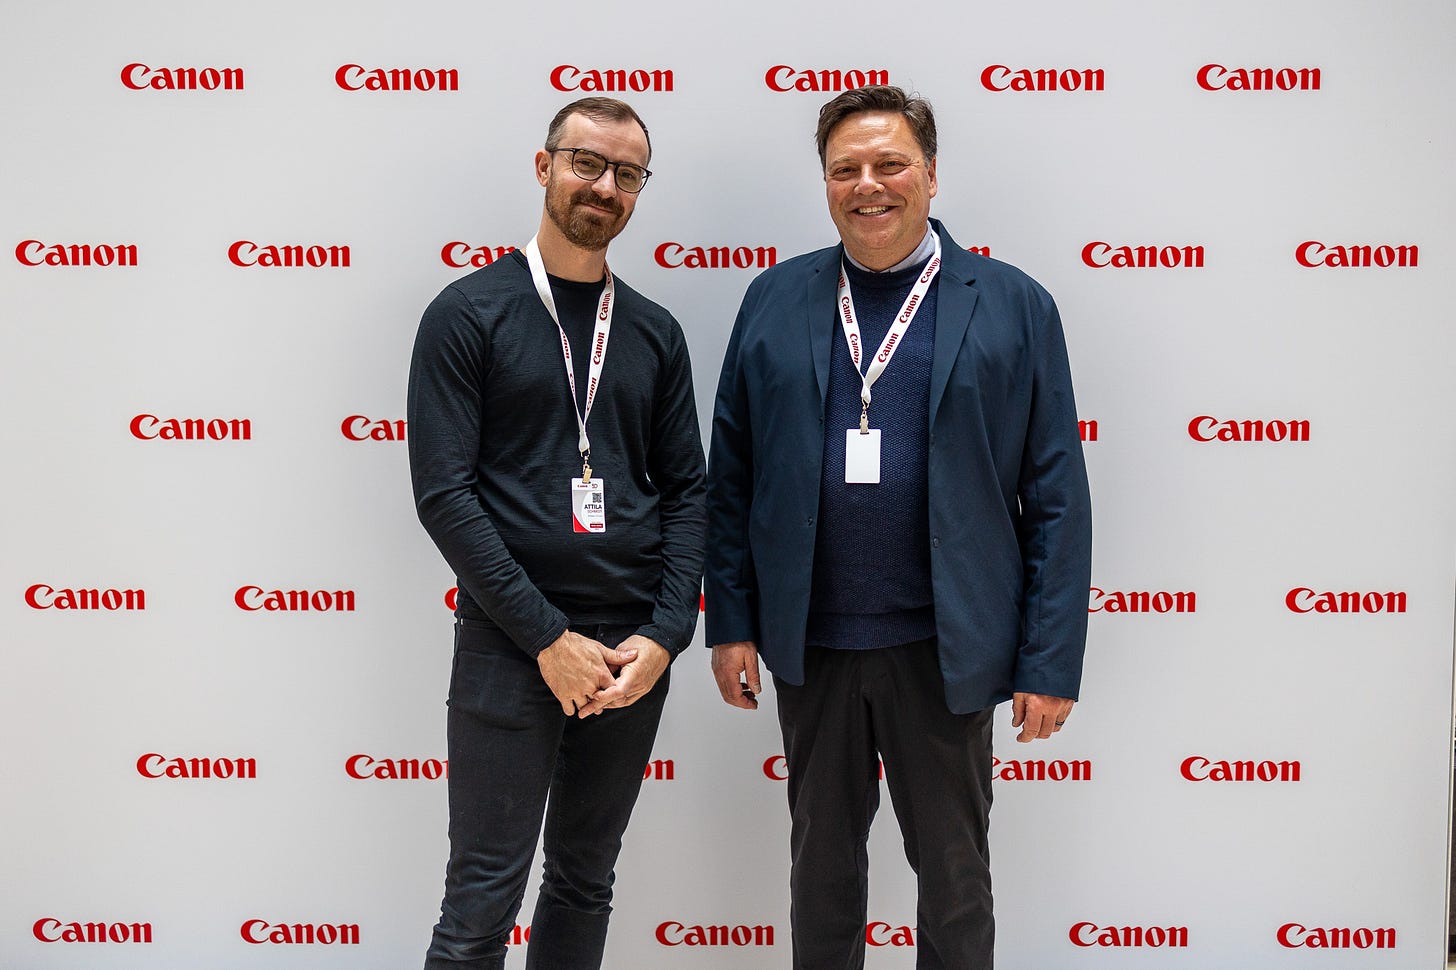 The photograph is of two people standing in front of a Canon background with the logo for Canon repeated multiple times. On the left is Attila Schmidt, wearing a black shirt and black pants. On the right is Wes Worsfold, wearing a blue jacket over a black shirt and black pants. They are both smiling.